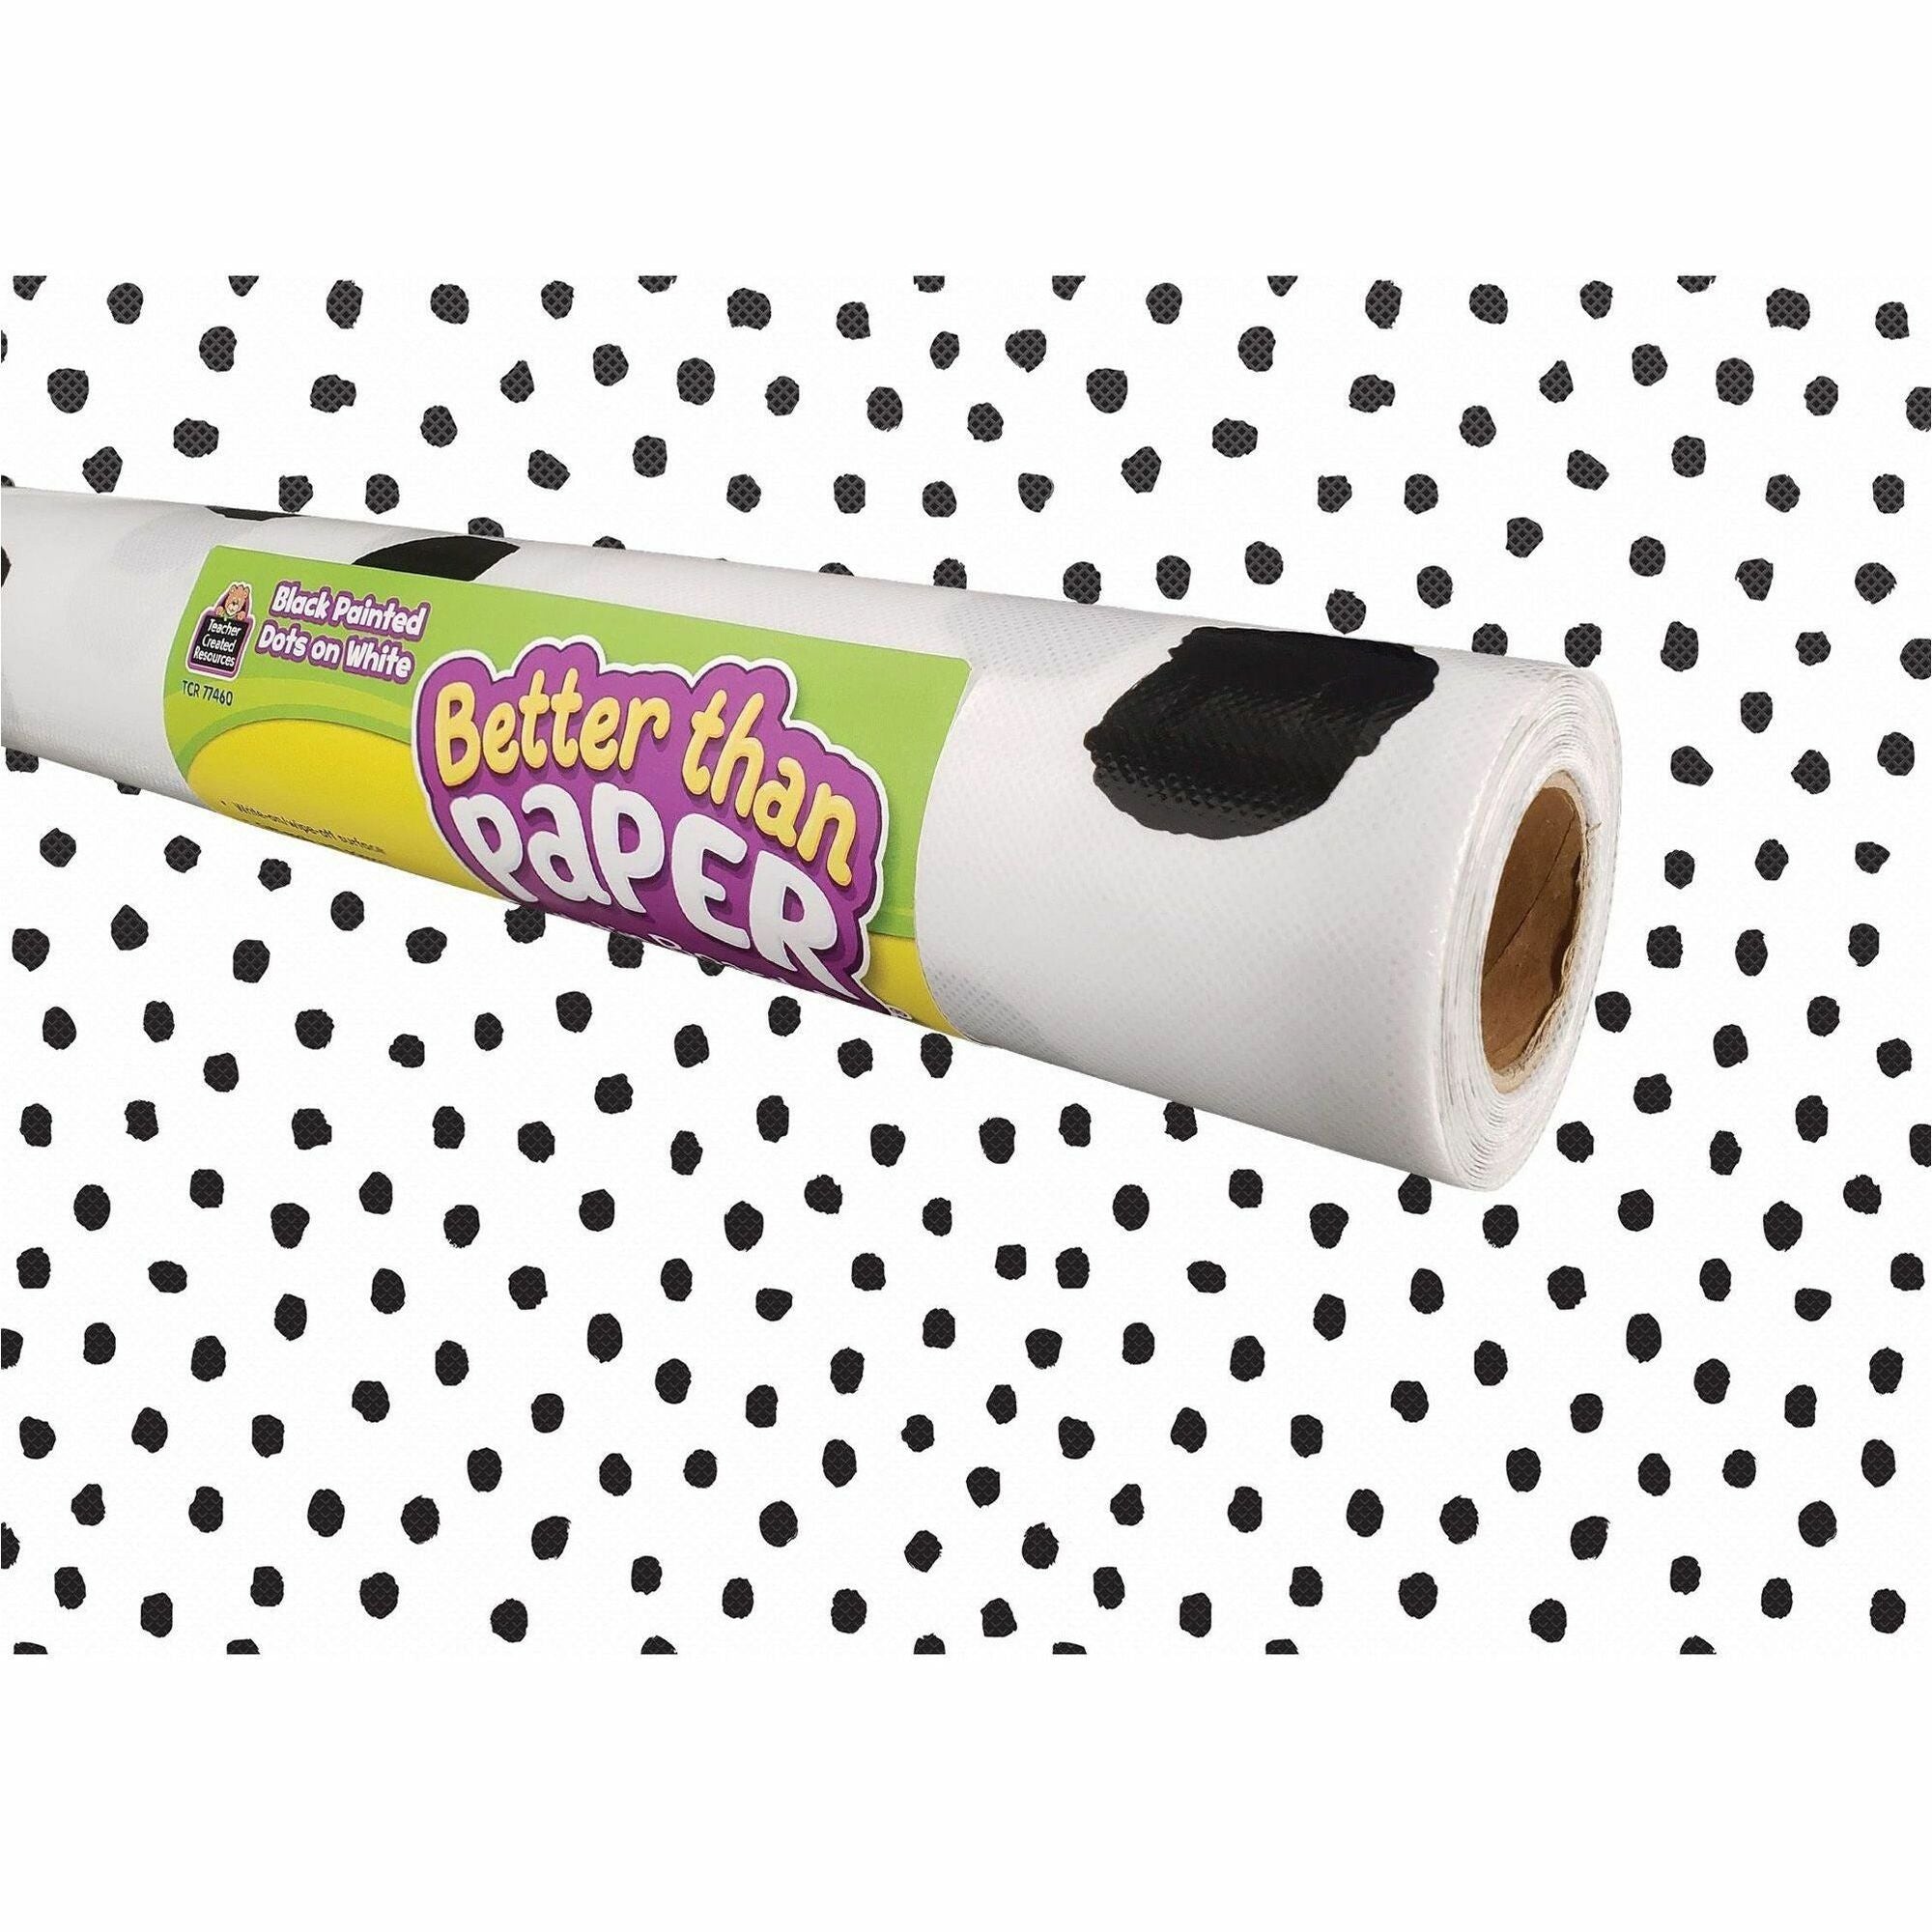 Teacher Created Resources Better Than Paper Board Roll - Bulletin Board, Classroom - 48"Width x 12 ftLength - Black Dots on White - 1 Roll